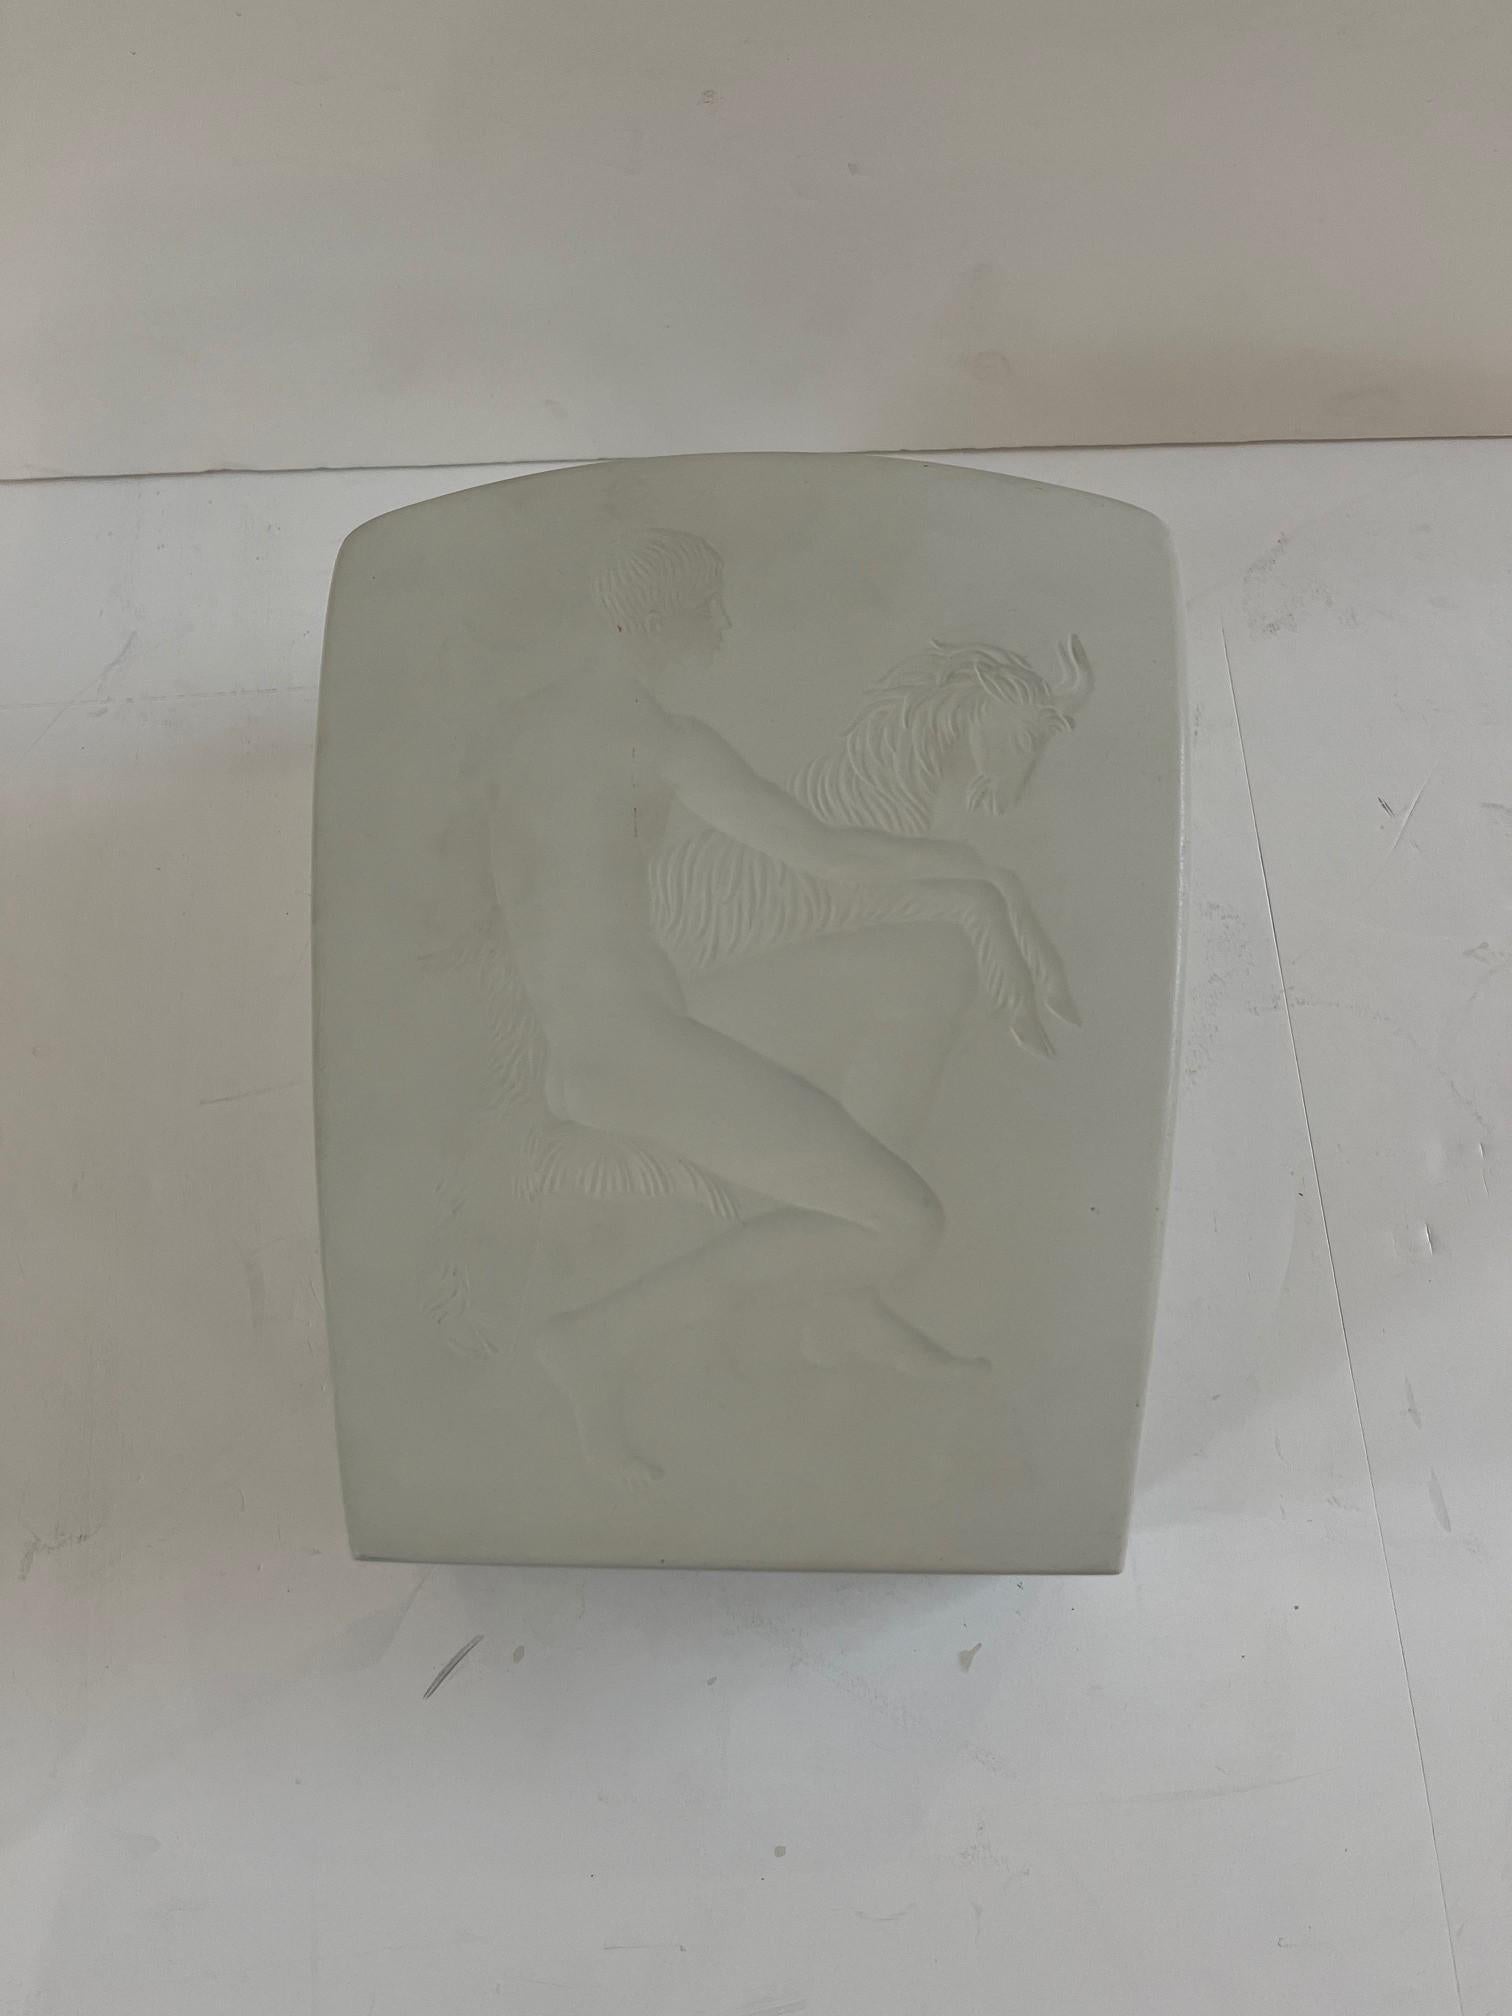 Vintage Exquisite White Vase Featuring a Reclining a Man with a Goat by Rena Rosenthal
Signé 